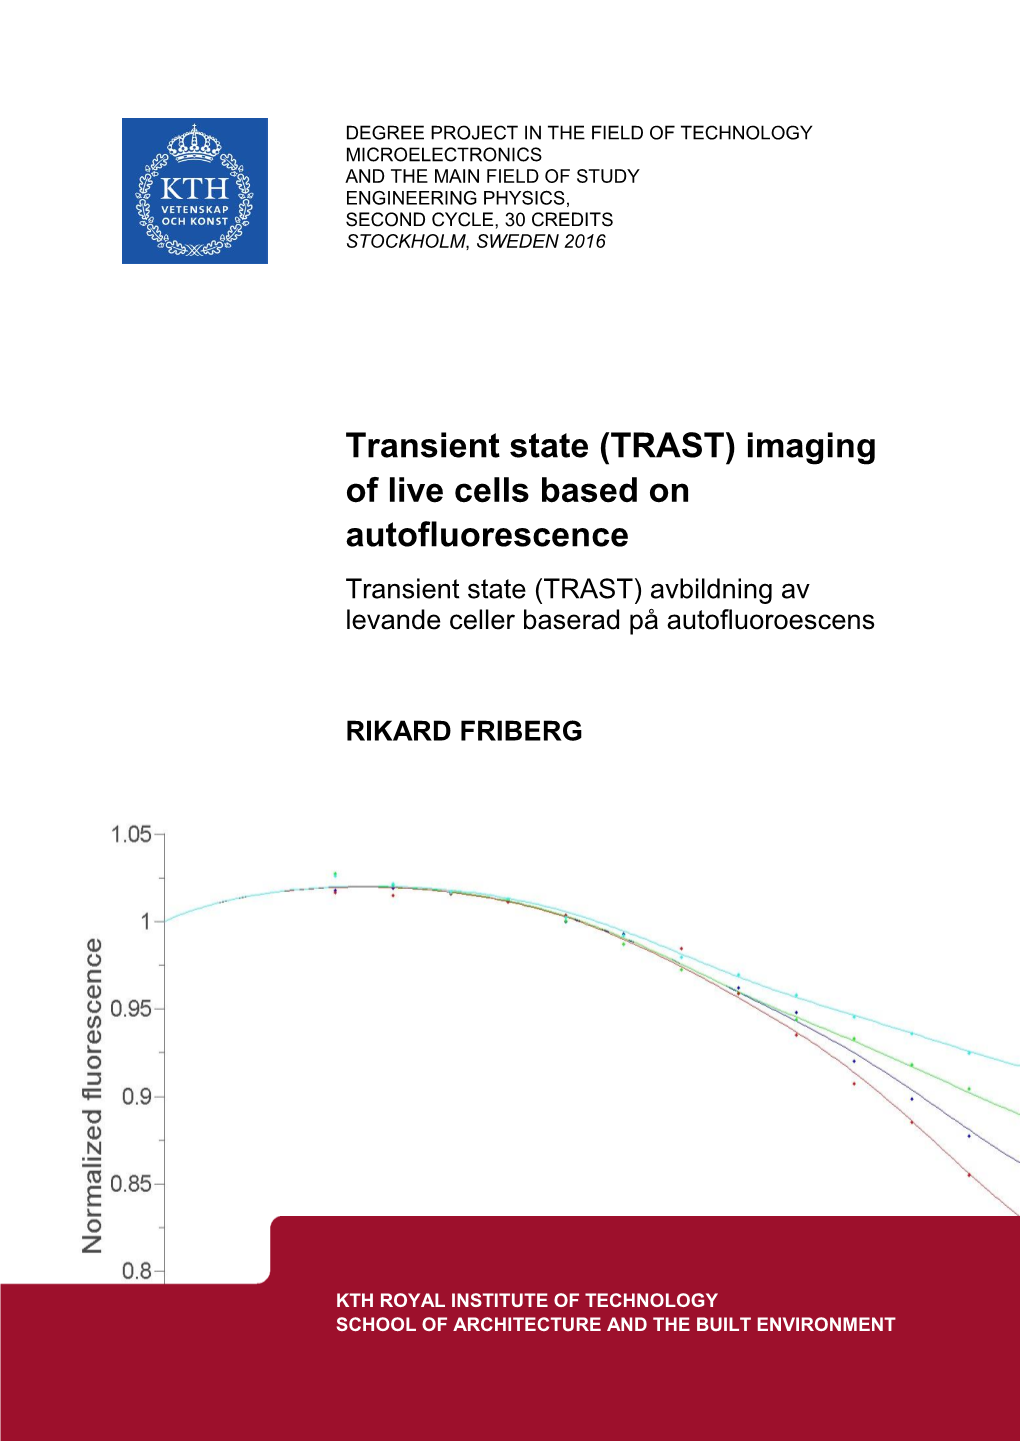 Transient State (TRAST) Imaging of Live Cells Based of Autofluorescence